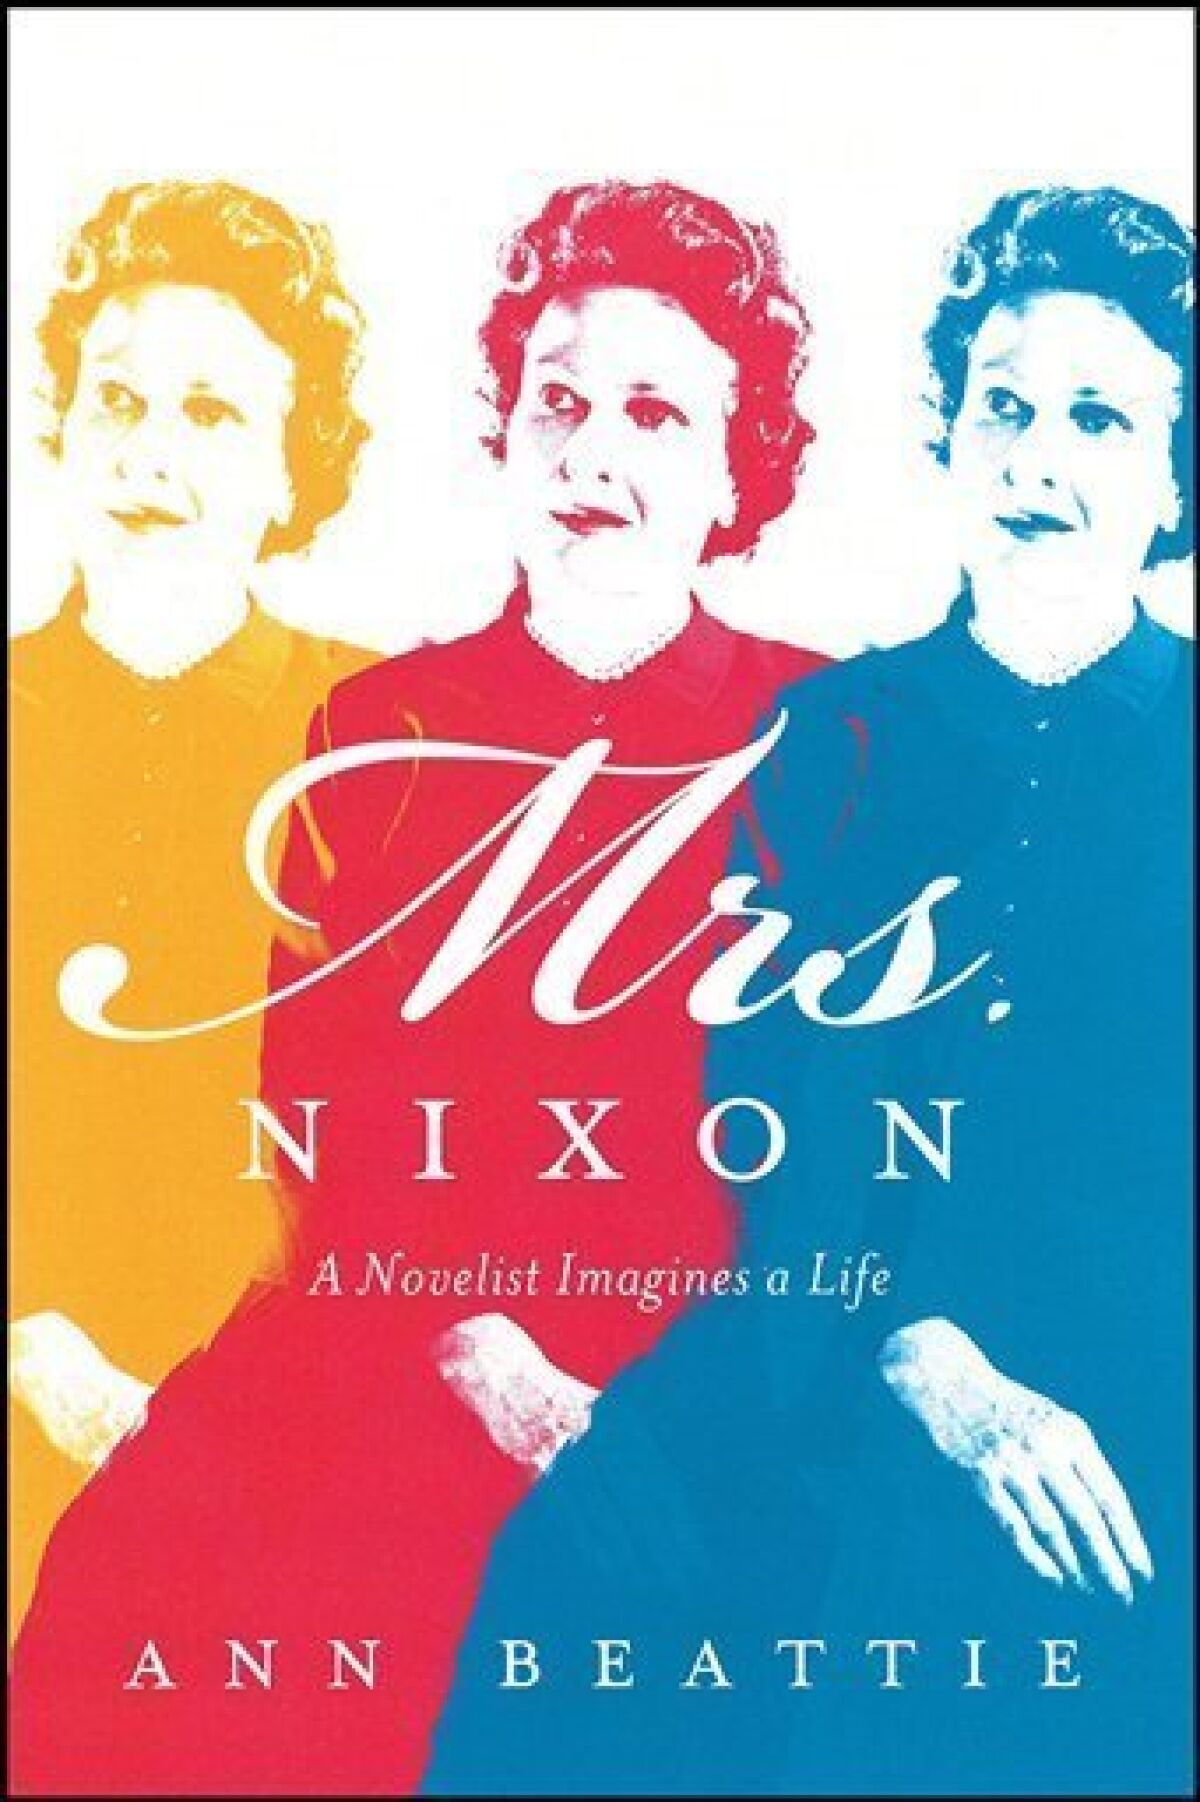 In this book cover image released by Scribner, "Mrs. Nixon: A Novelist Imagines a Life," by Ann Beattie, is shown. (AP Photo/Scribner)